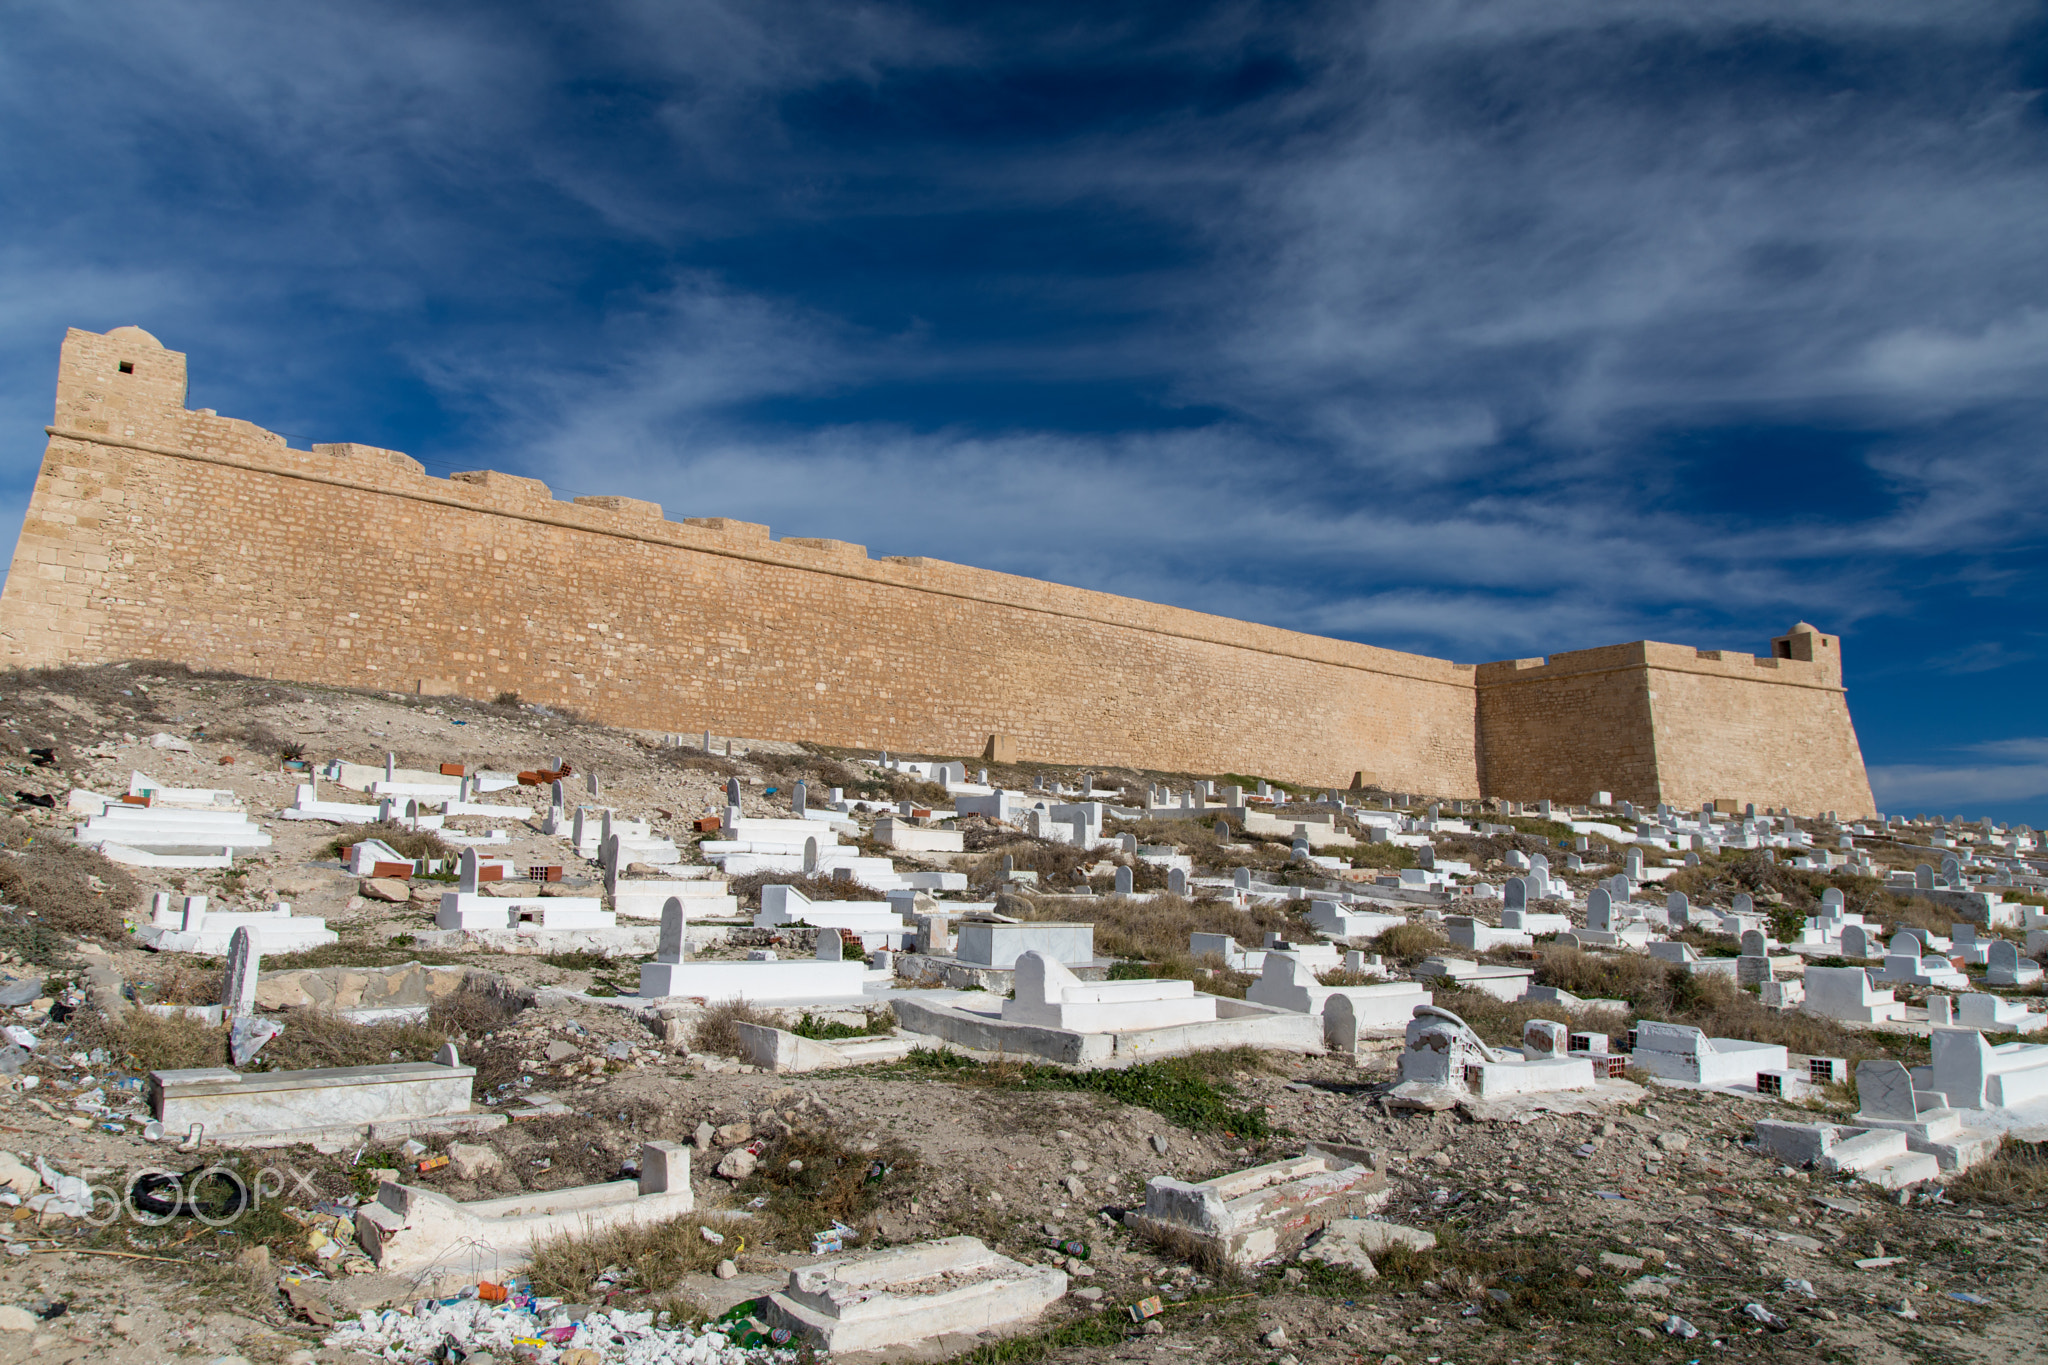 The Exterior Wall of Ottoman Fort - with the Mahdia Historic Cemetary